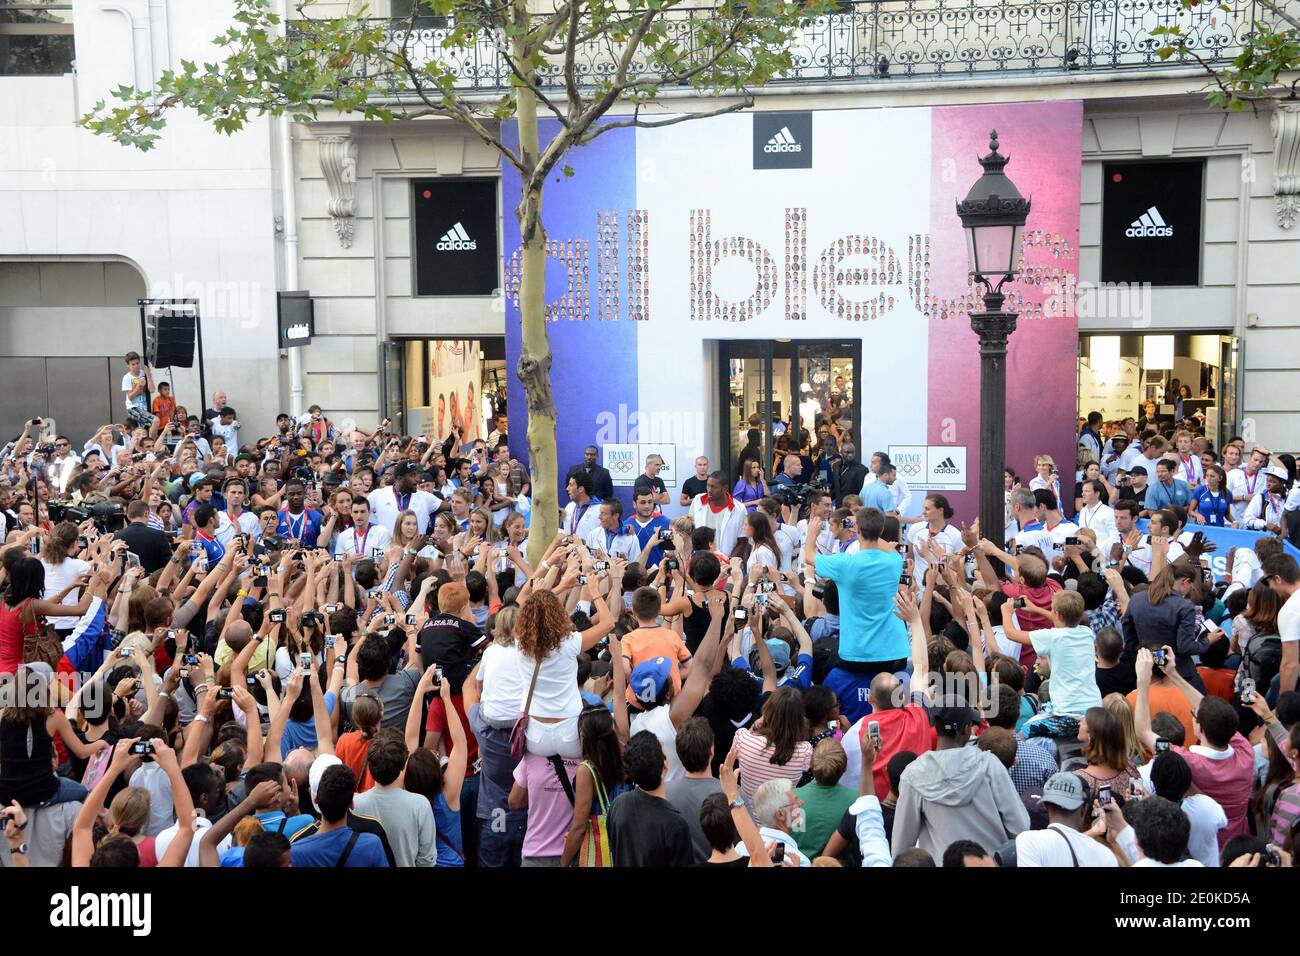 Atmosphere at a meeting of the French Olympic medalists with their fans  outside the Adidas flagship